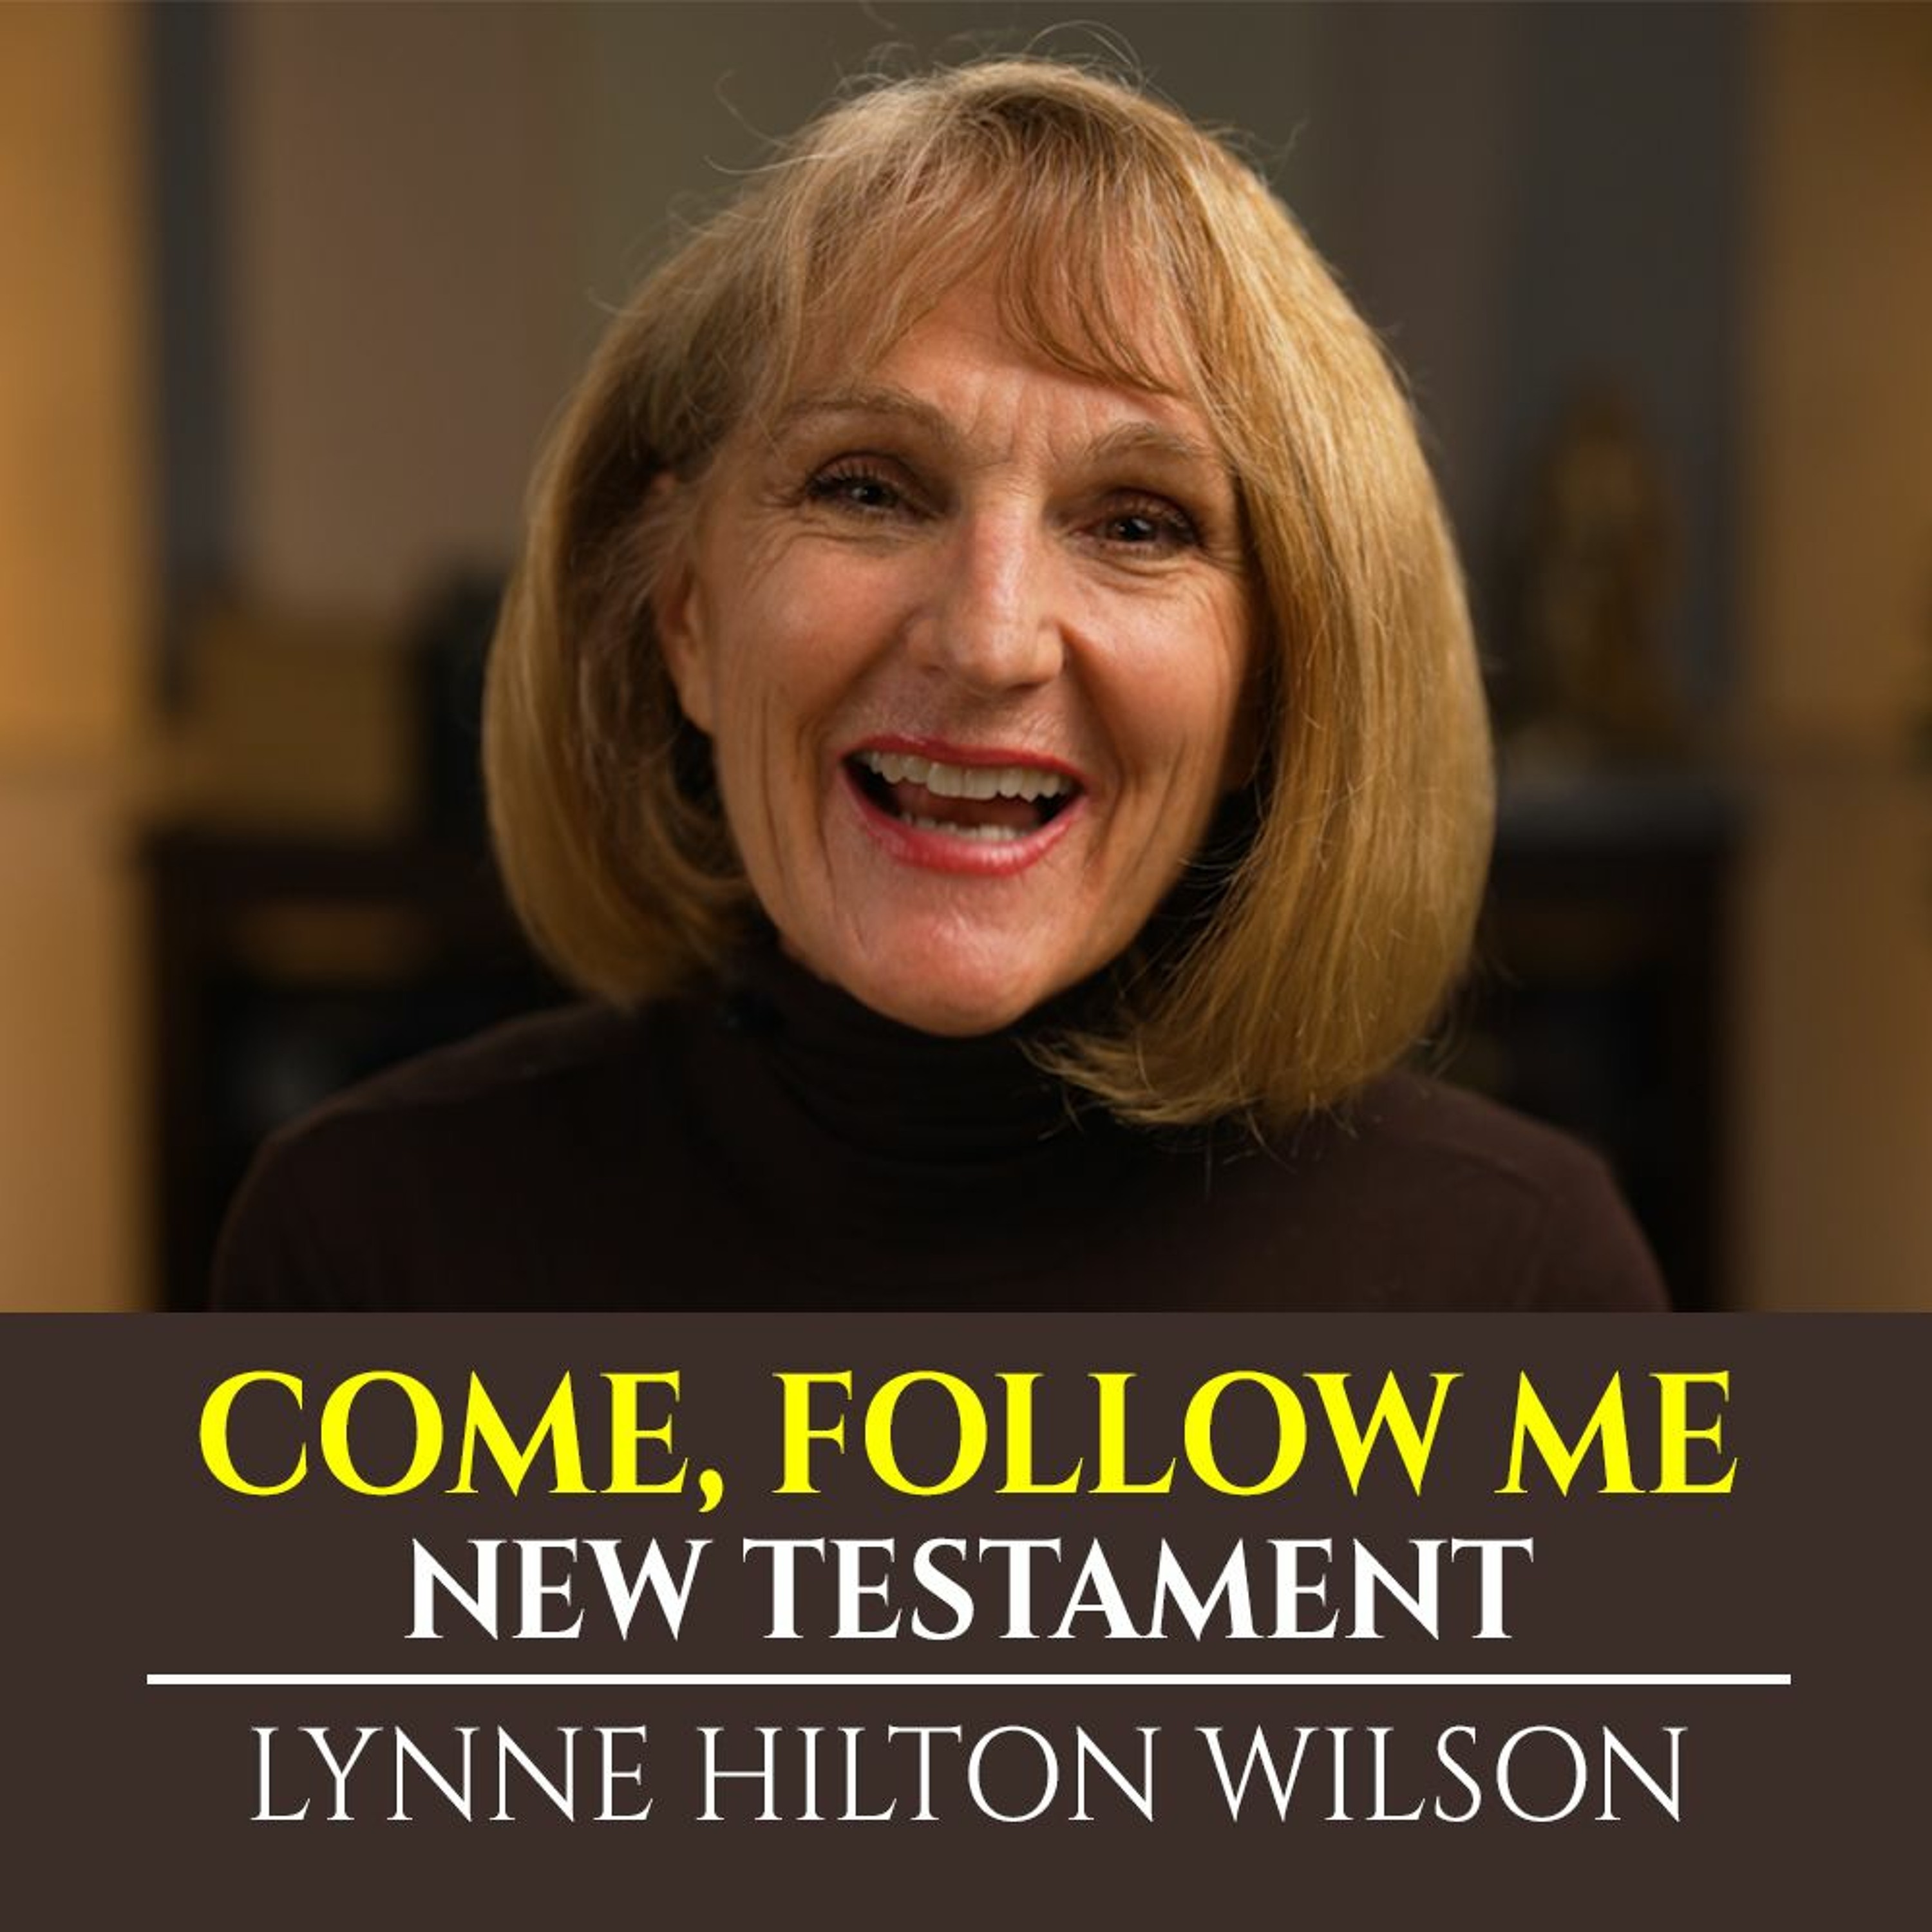 Philippians & Colossians: New Testament with Lynne Wilson (Come, Follow Me)